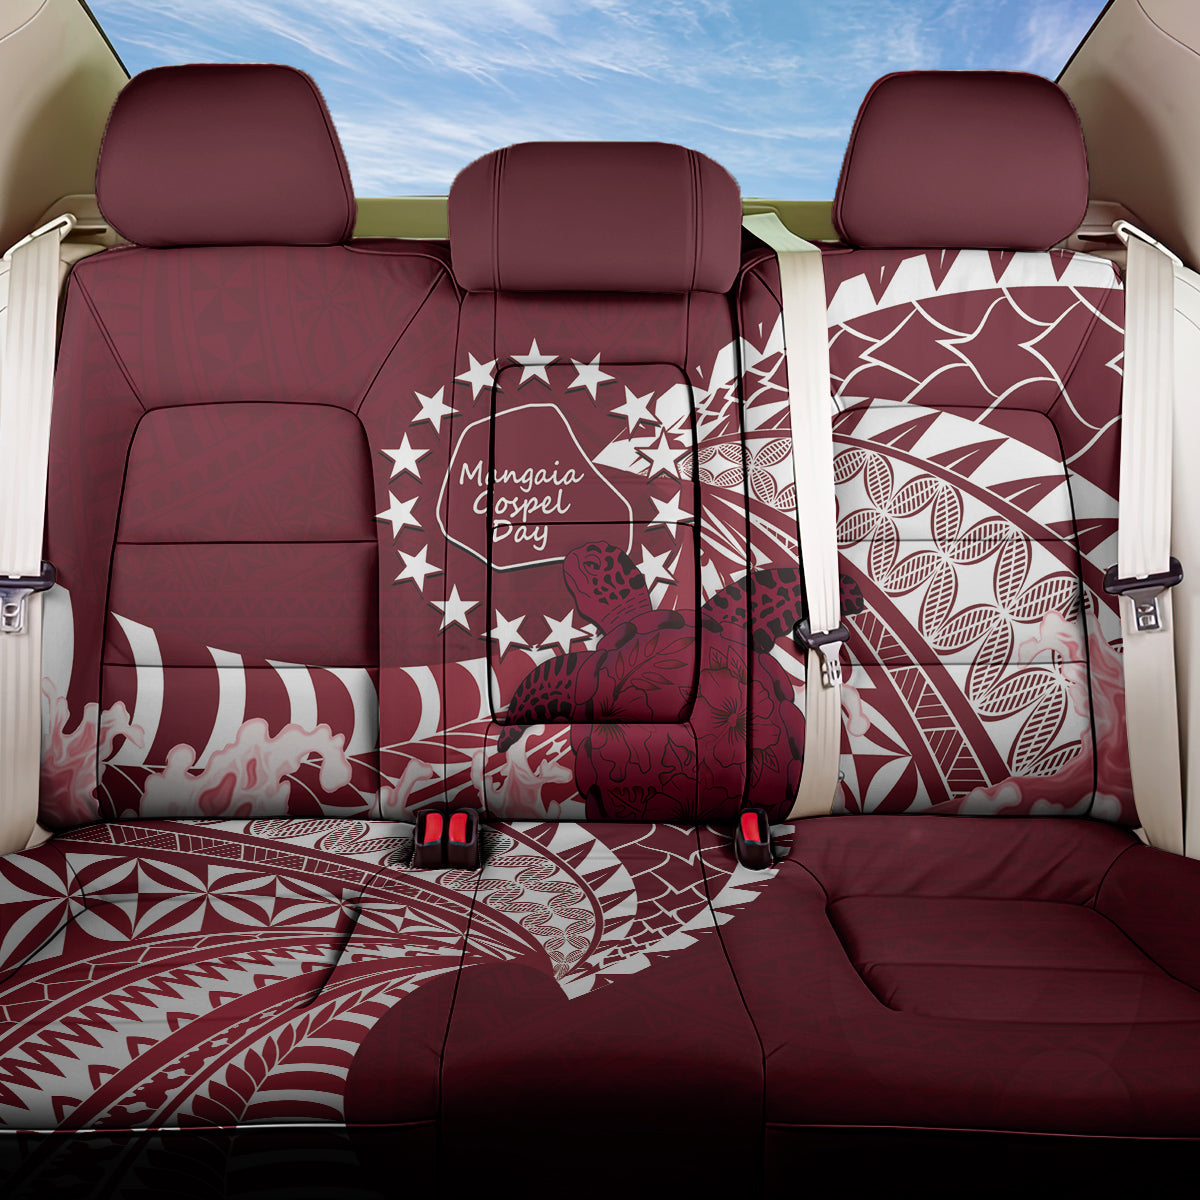 Cook Islands Mangaia Gospel Day Back Car Seat Cover Polynesian Art With Sea Turtle